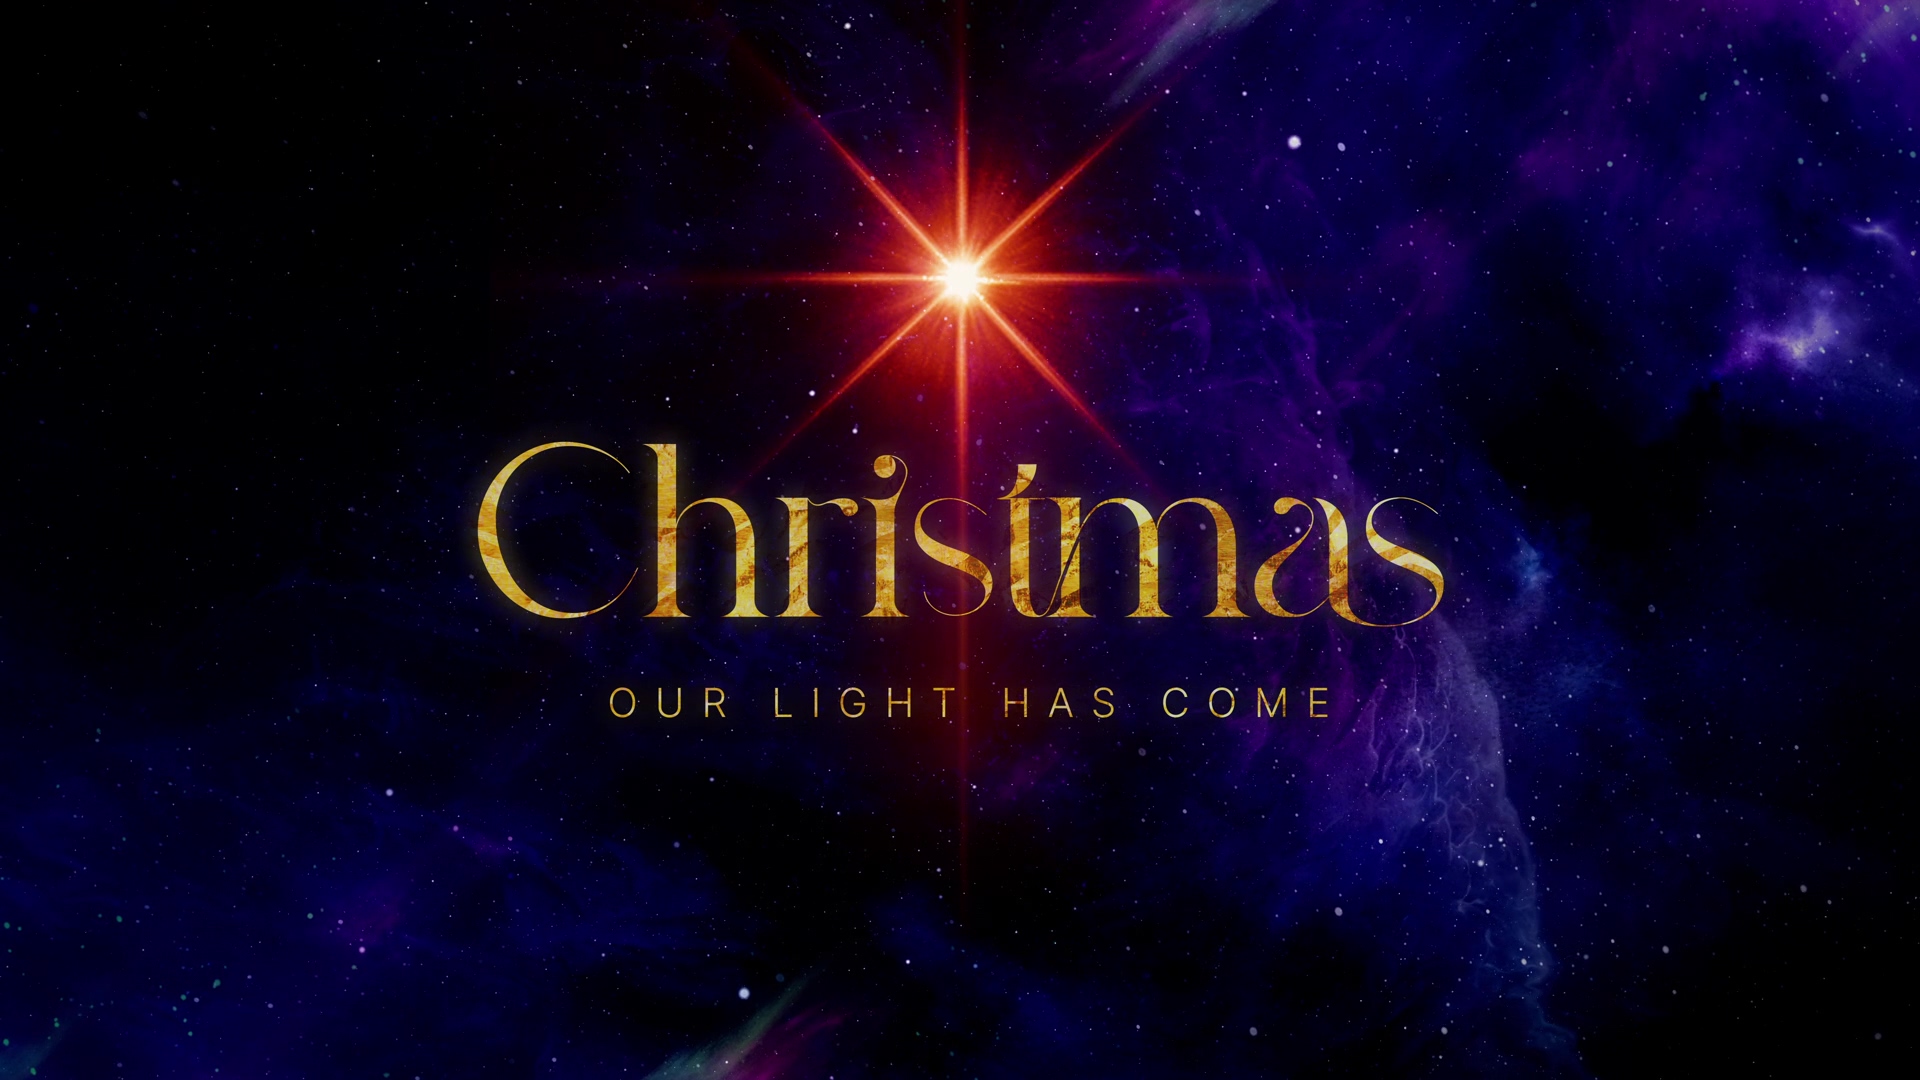 Inage with text "Christmas - Our light has come"